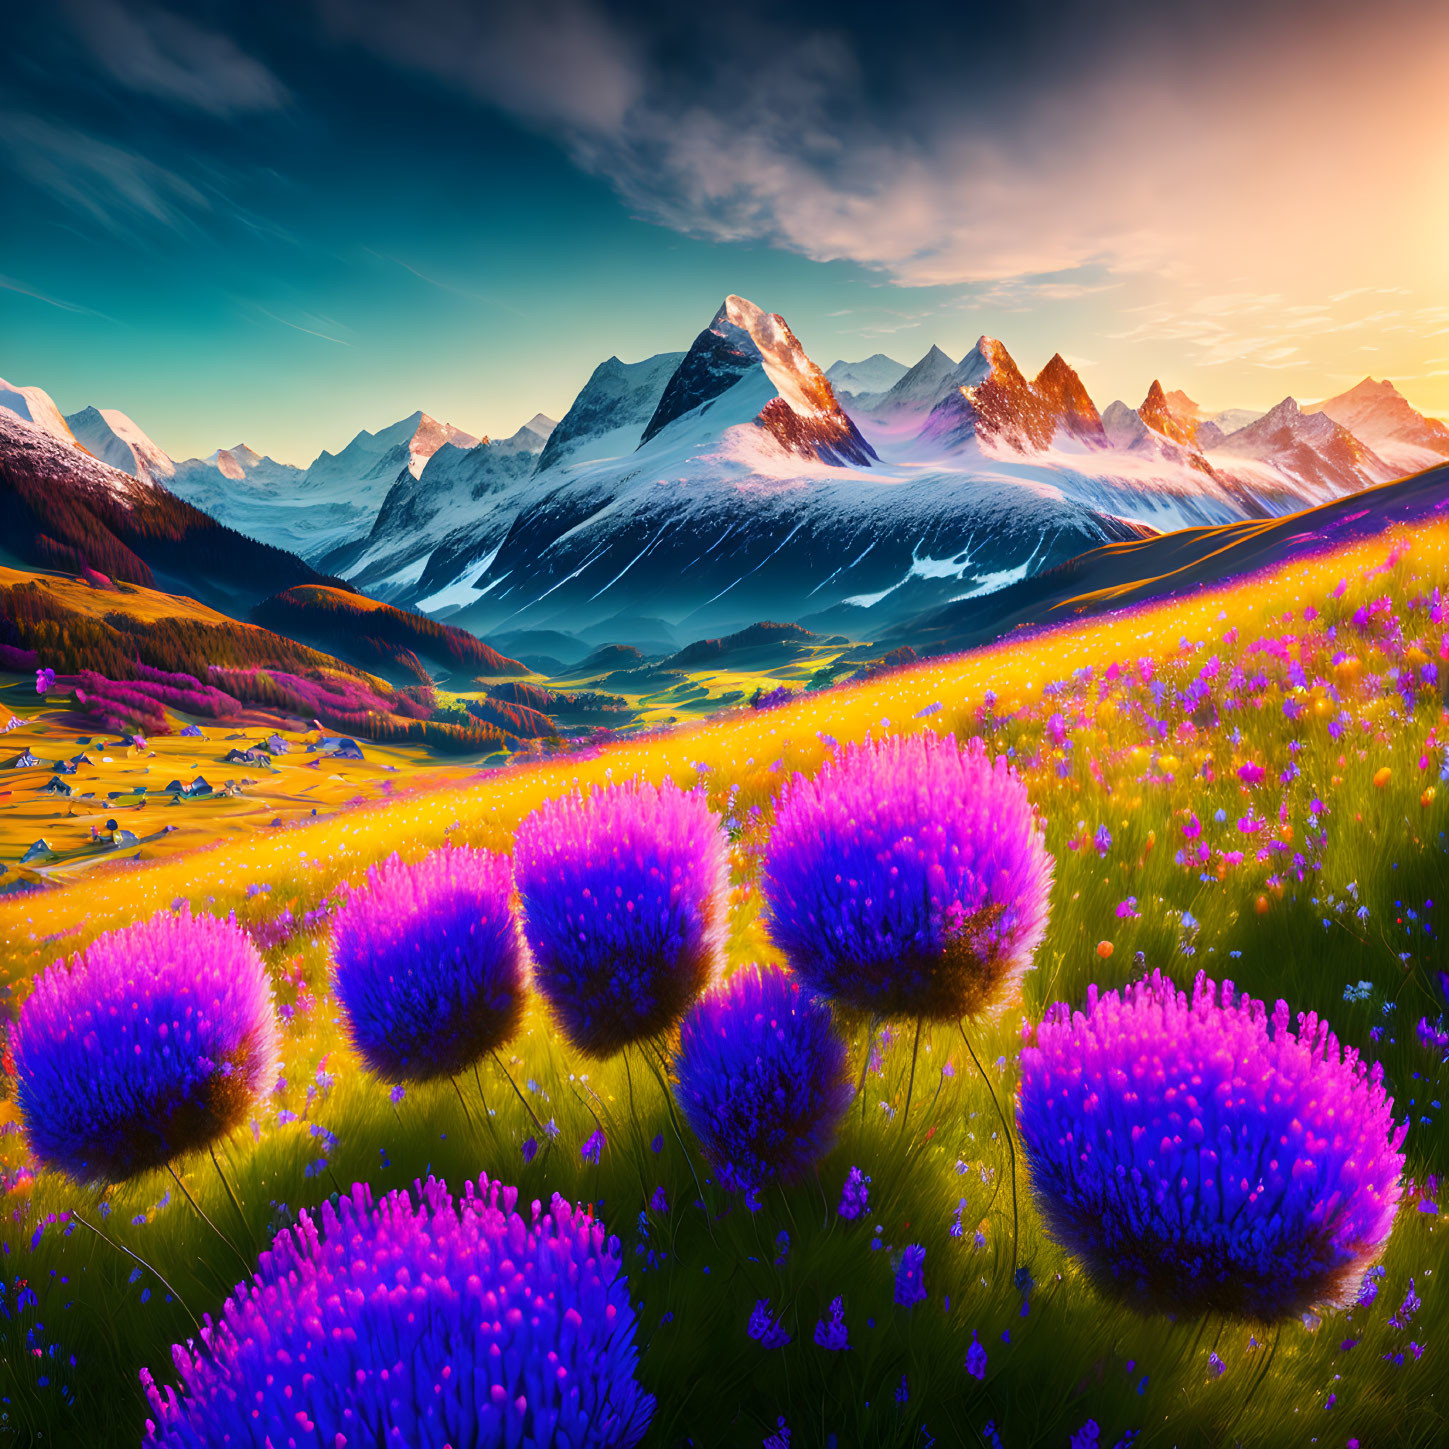 Majestic snow-capped mountains backdrop vivid purple flowers in glowing meadow